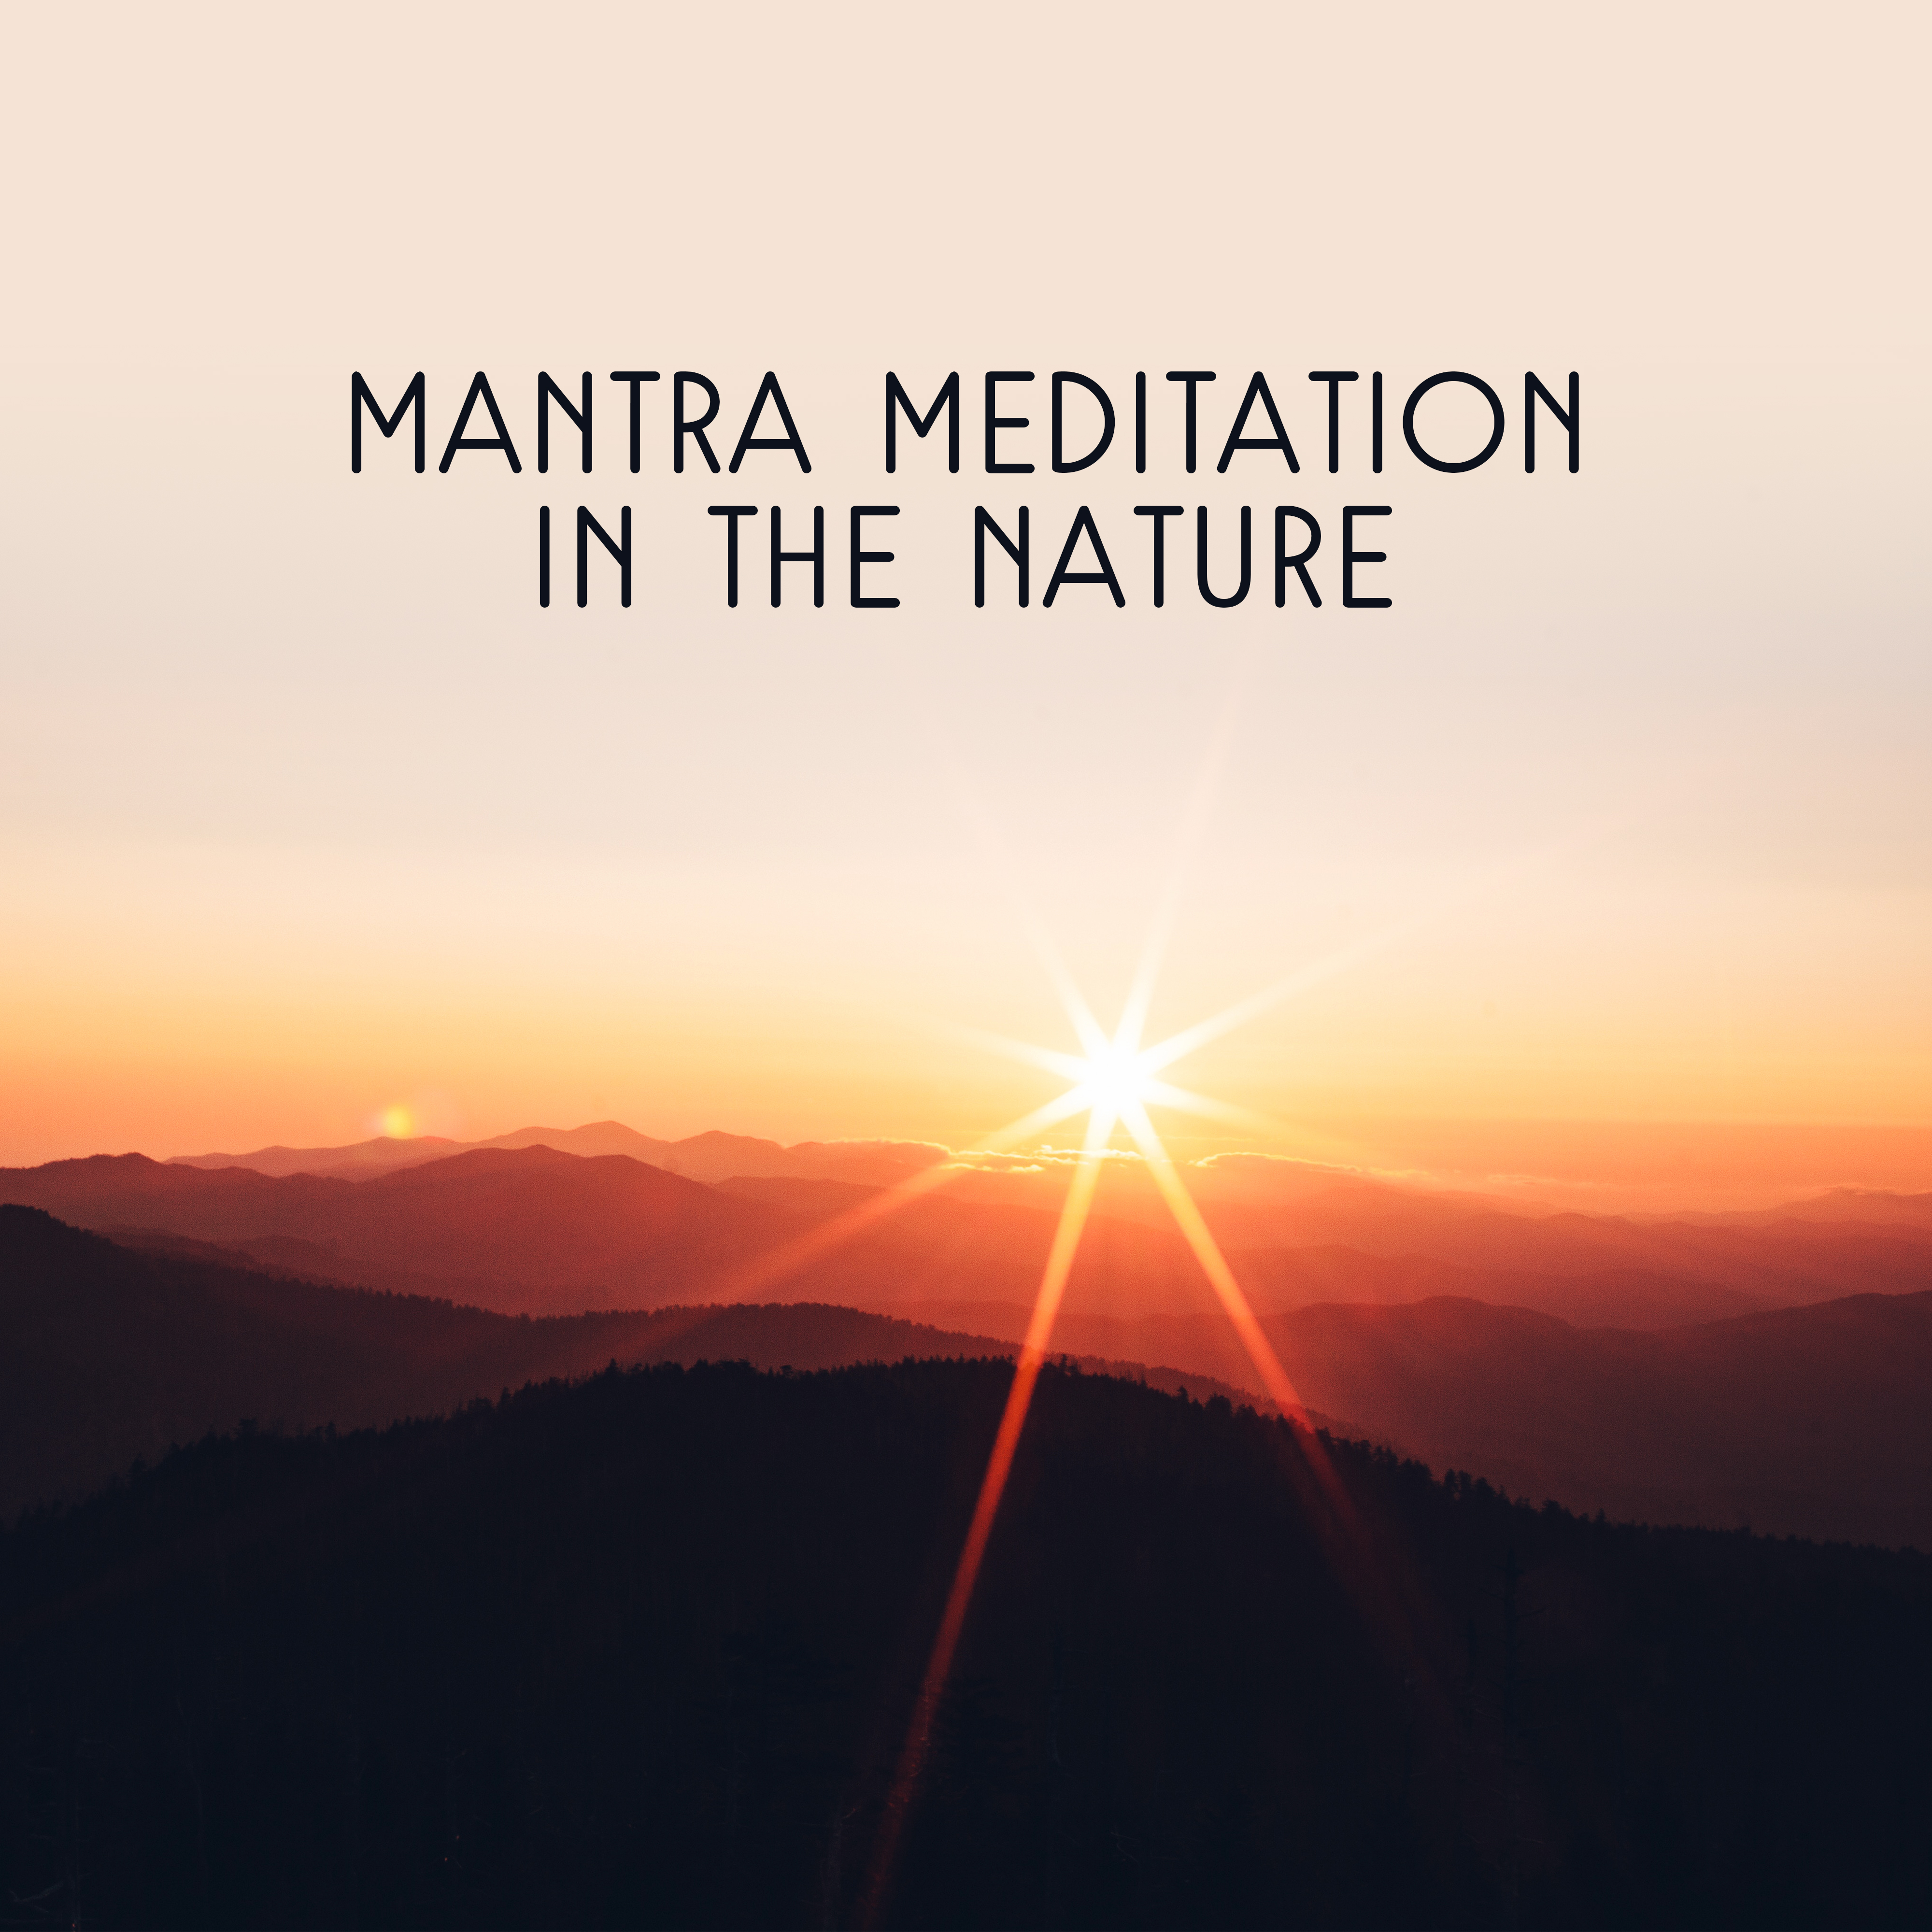 Mantra Meditation in the Nature